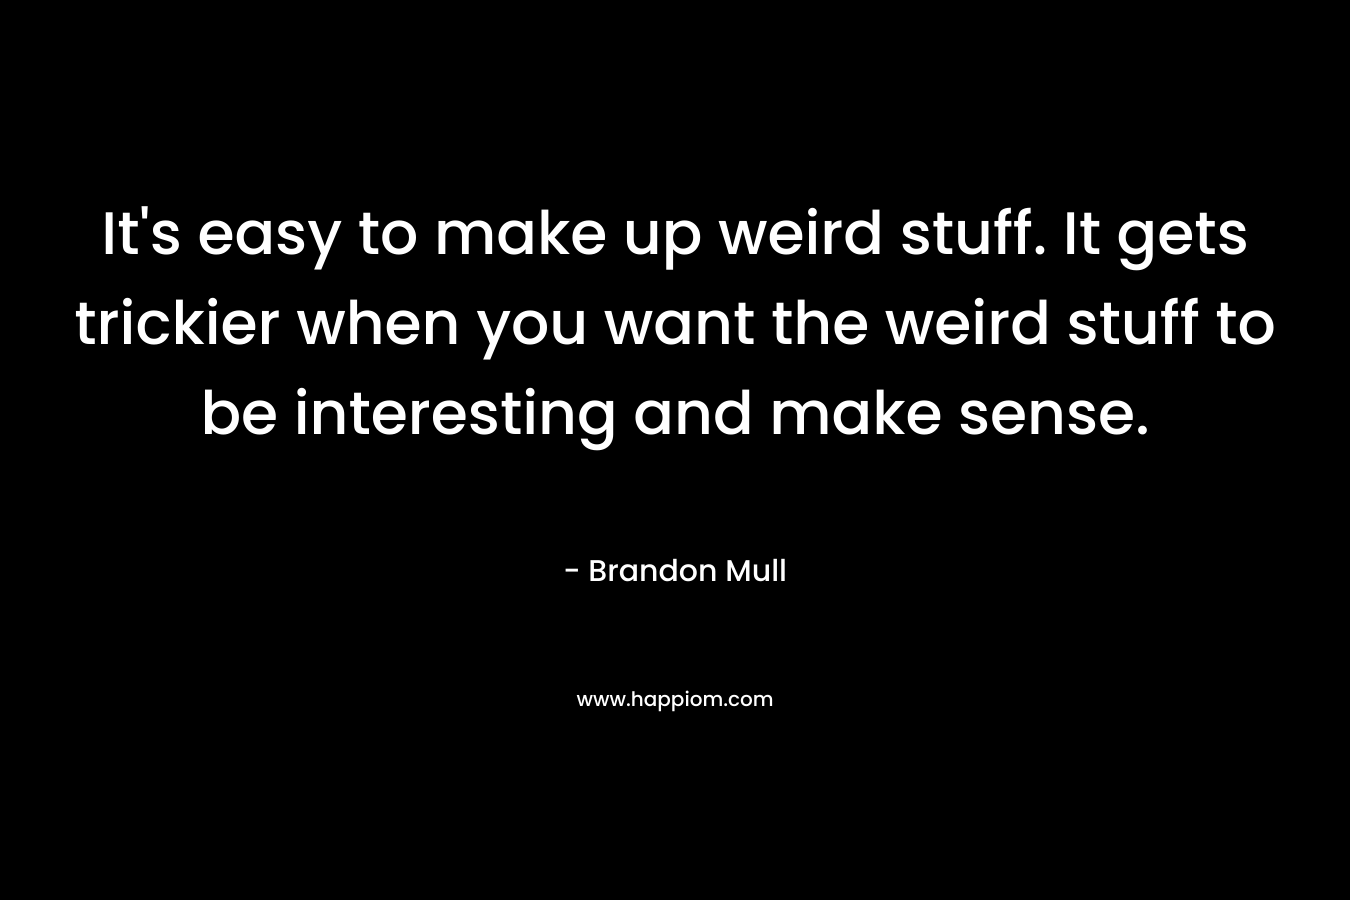 It's easy to make up weird stuff. It gets trickier when you want the weird stuff to be interesting and make sense.